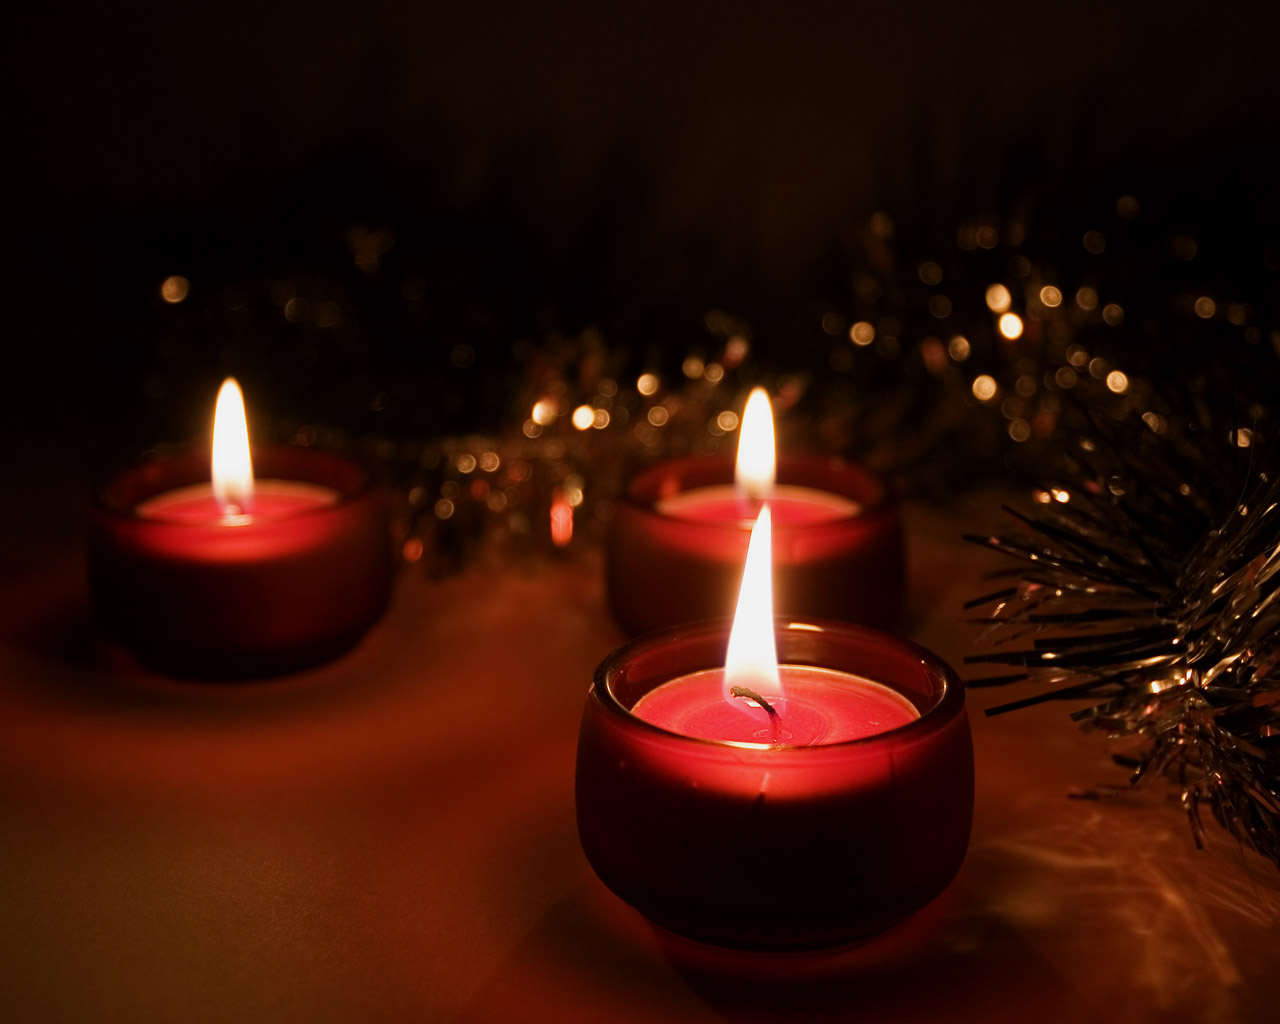 Romantic Candle Light Romantic Candlelight Pictures Candles at